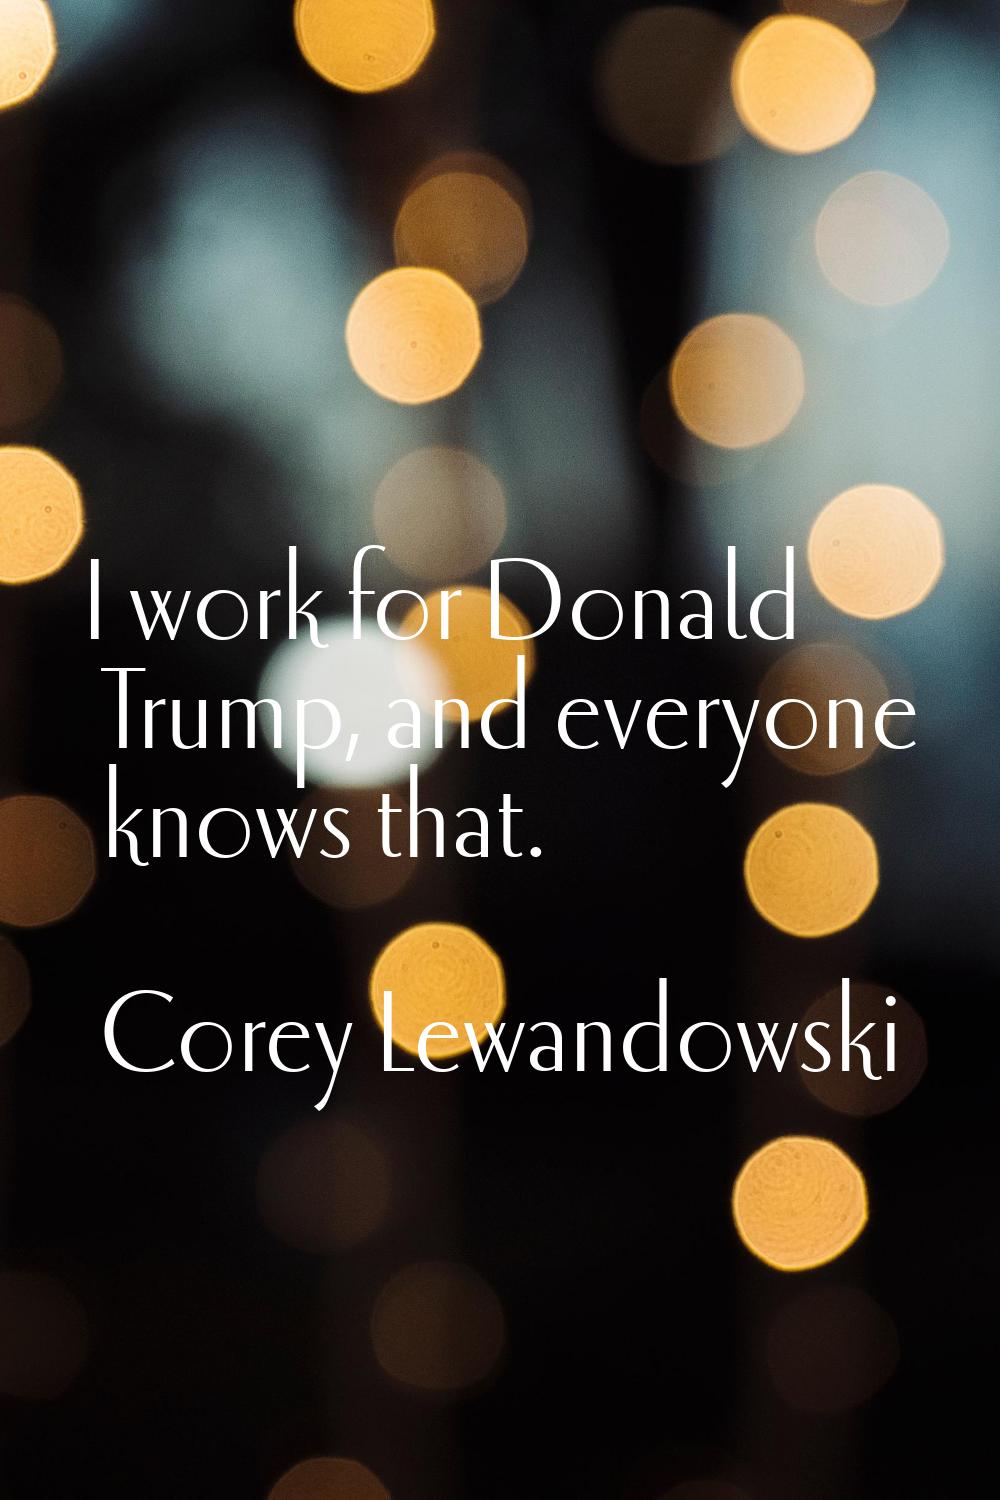 I work for Donald Trump, and everyone knows that.